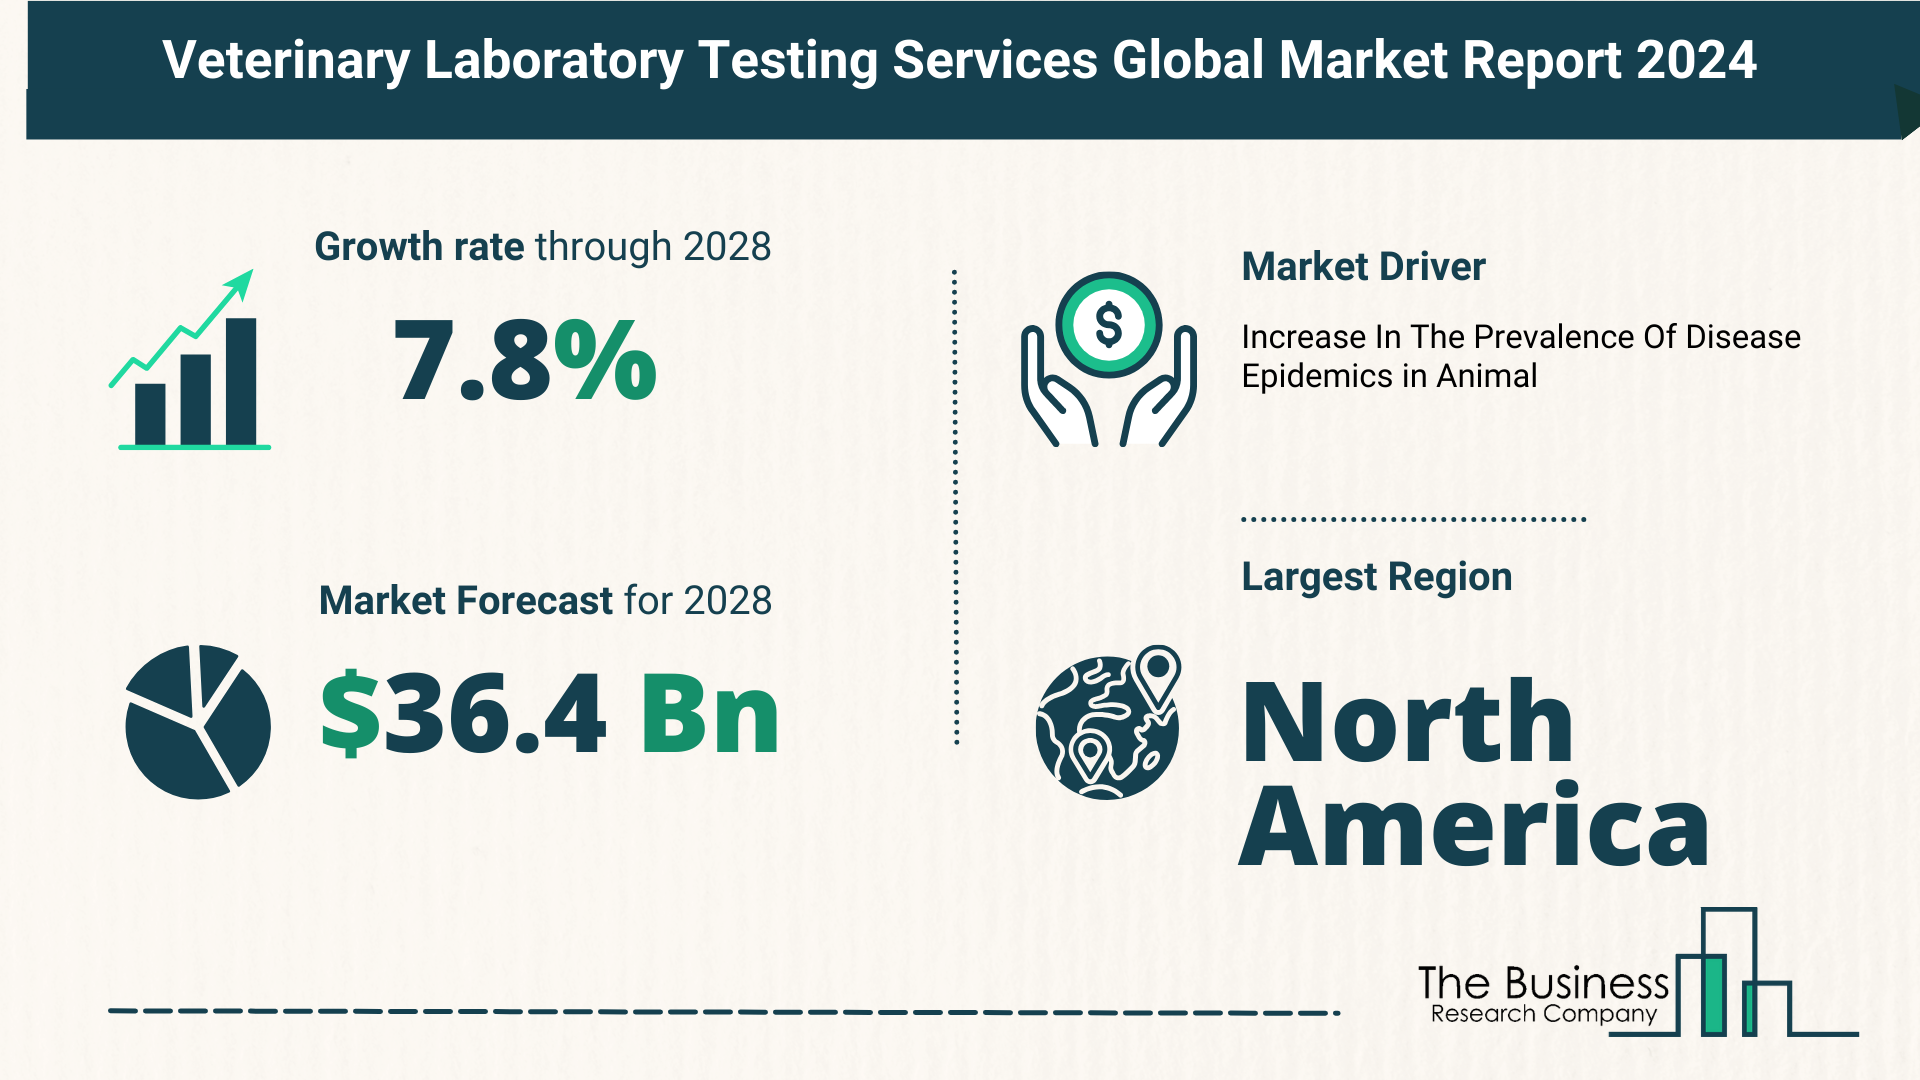 5 Key Insights On The Veterinary Laboratory Testing Services Market 2024